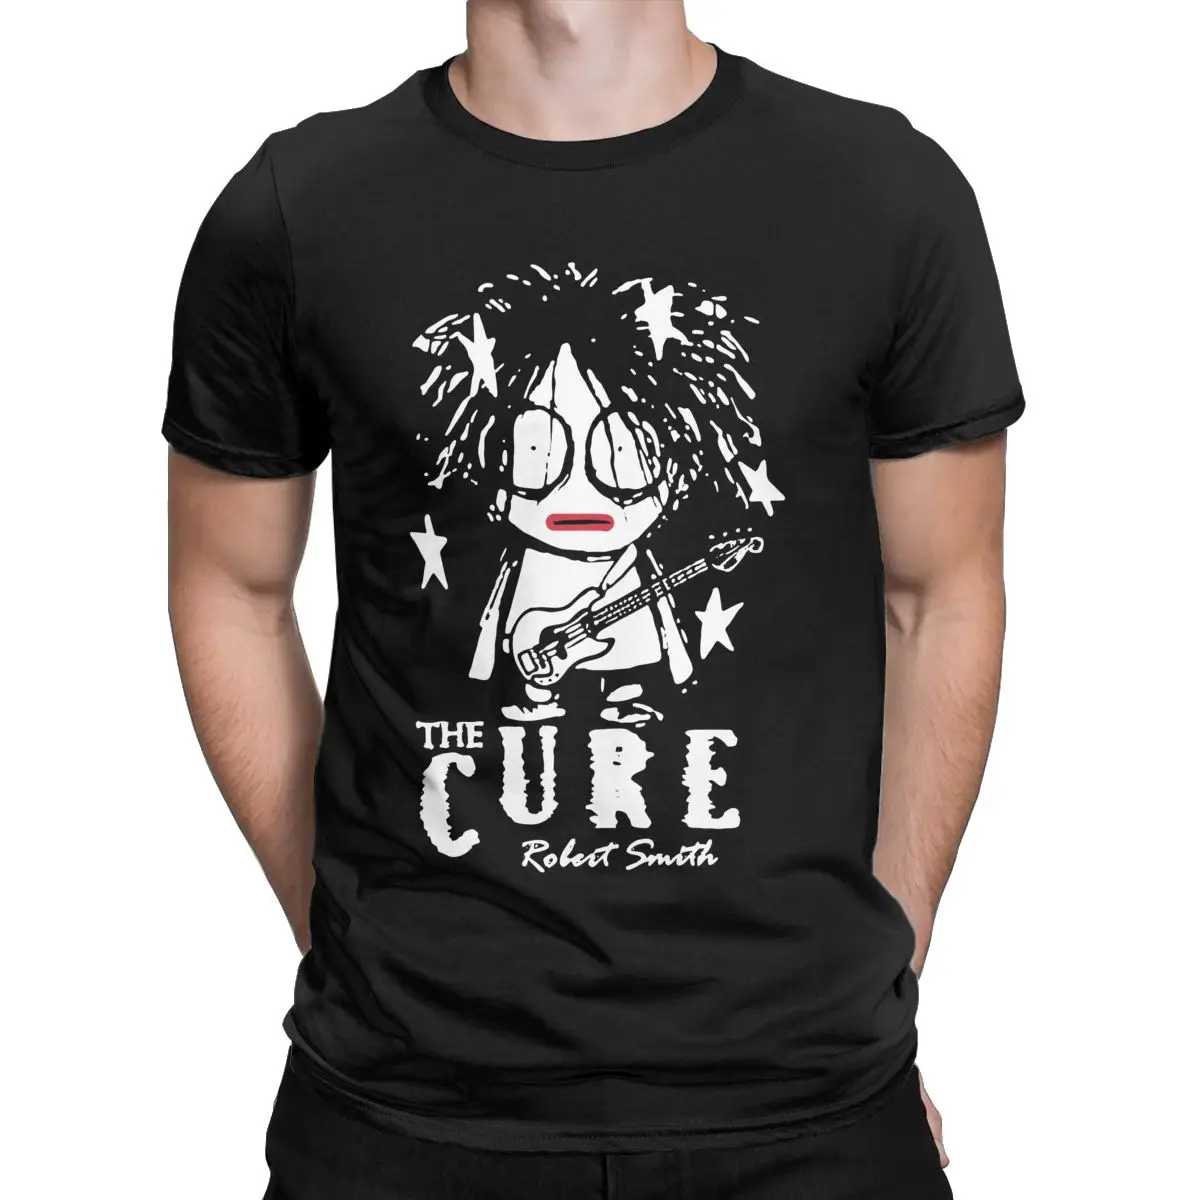 Robert Smith The Cure T Shirts for Men Pure Cotton Vintage T-Shirts O Neck Tees Short Sleeve Clothing Gift Idea